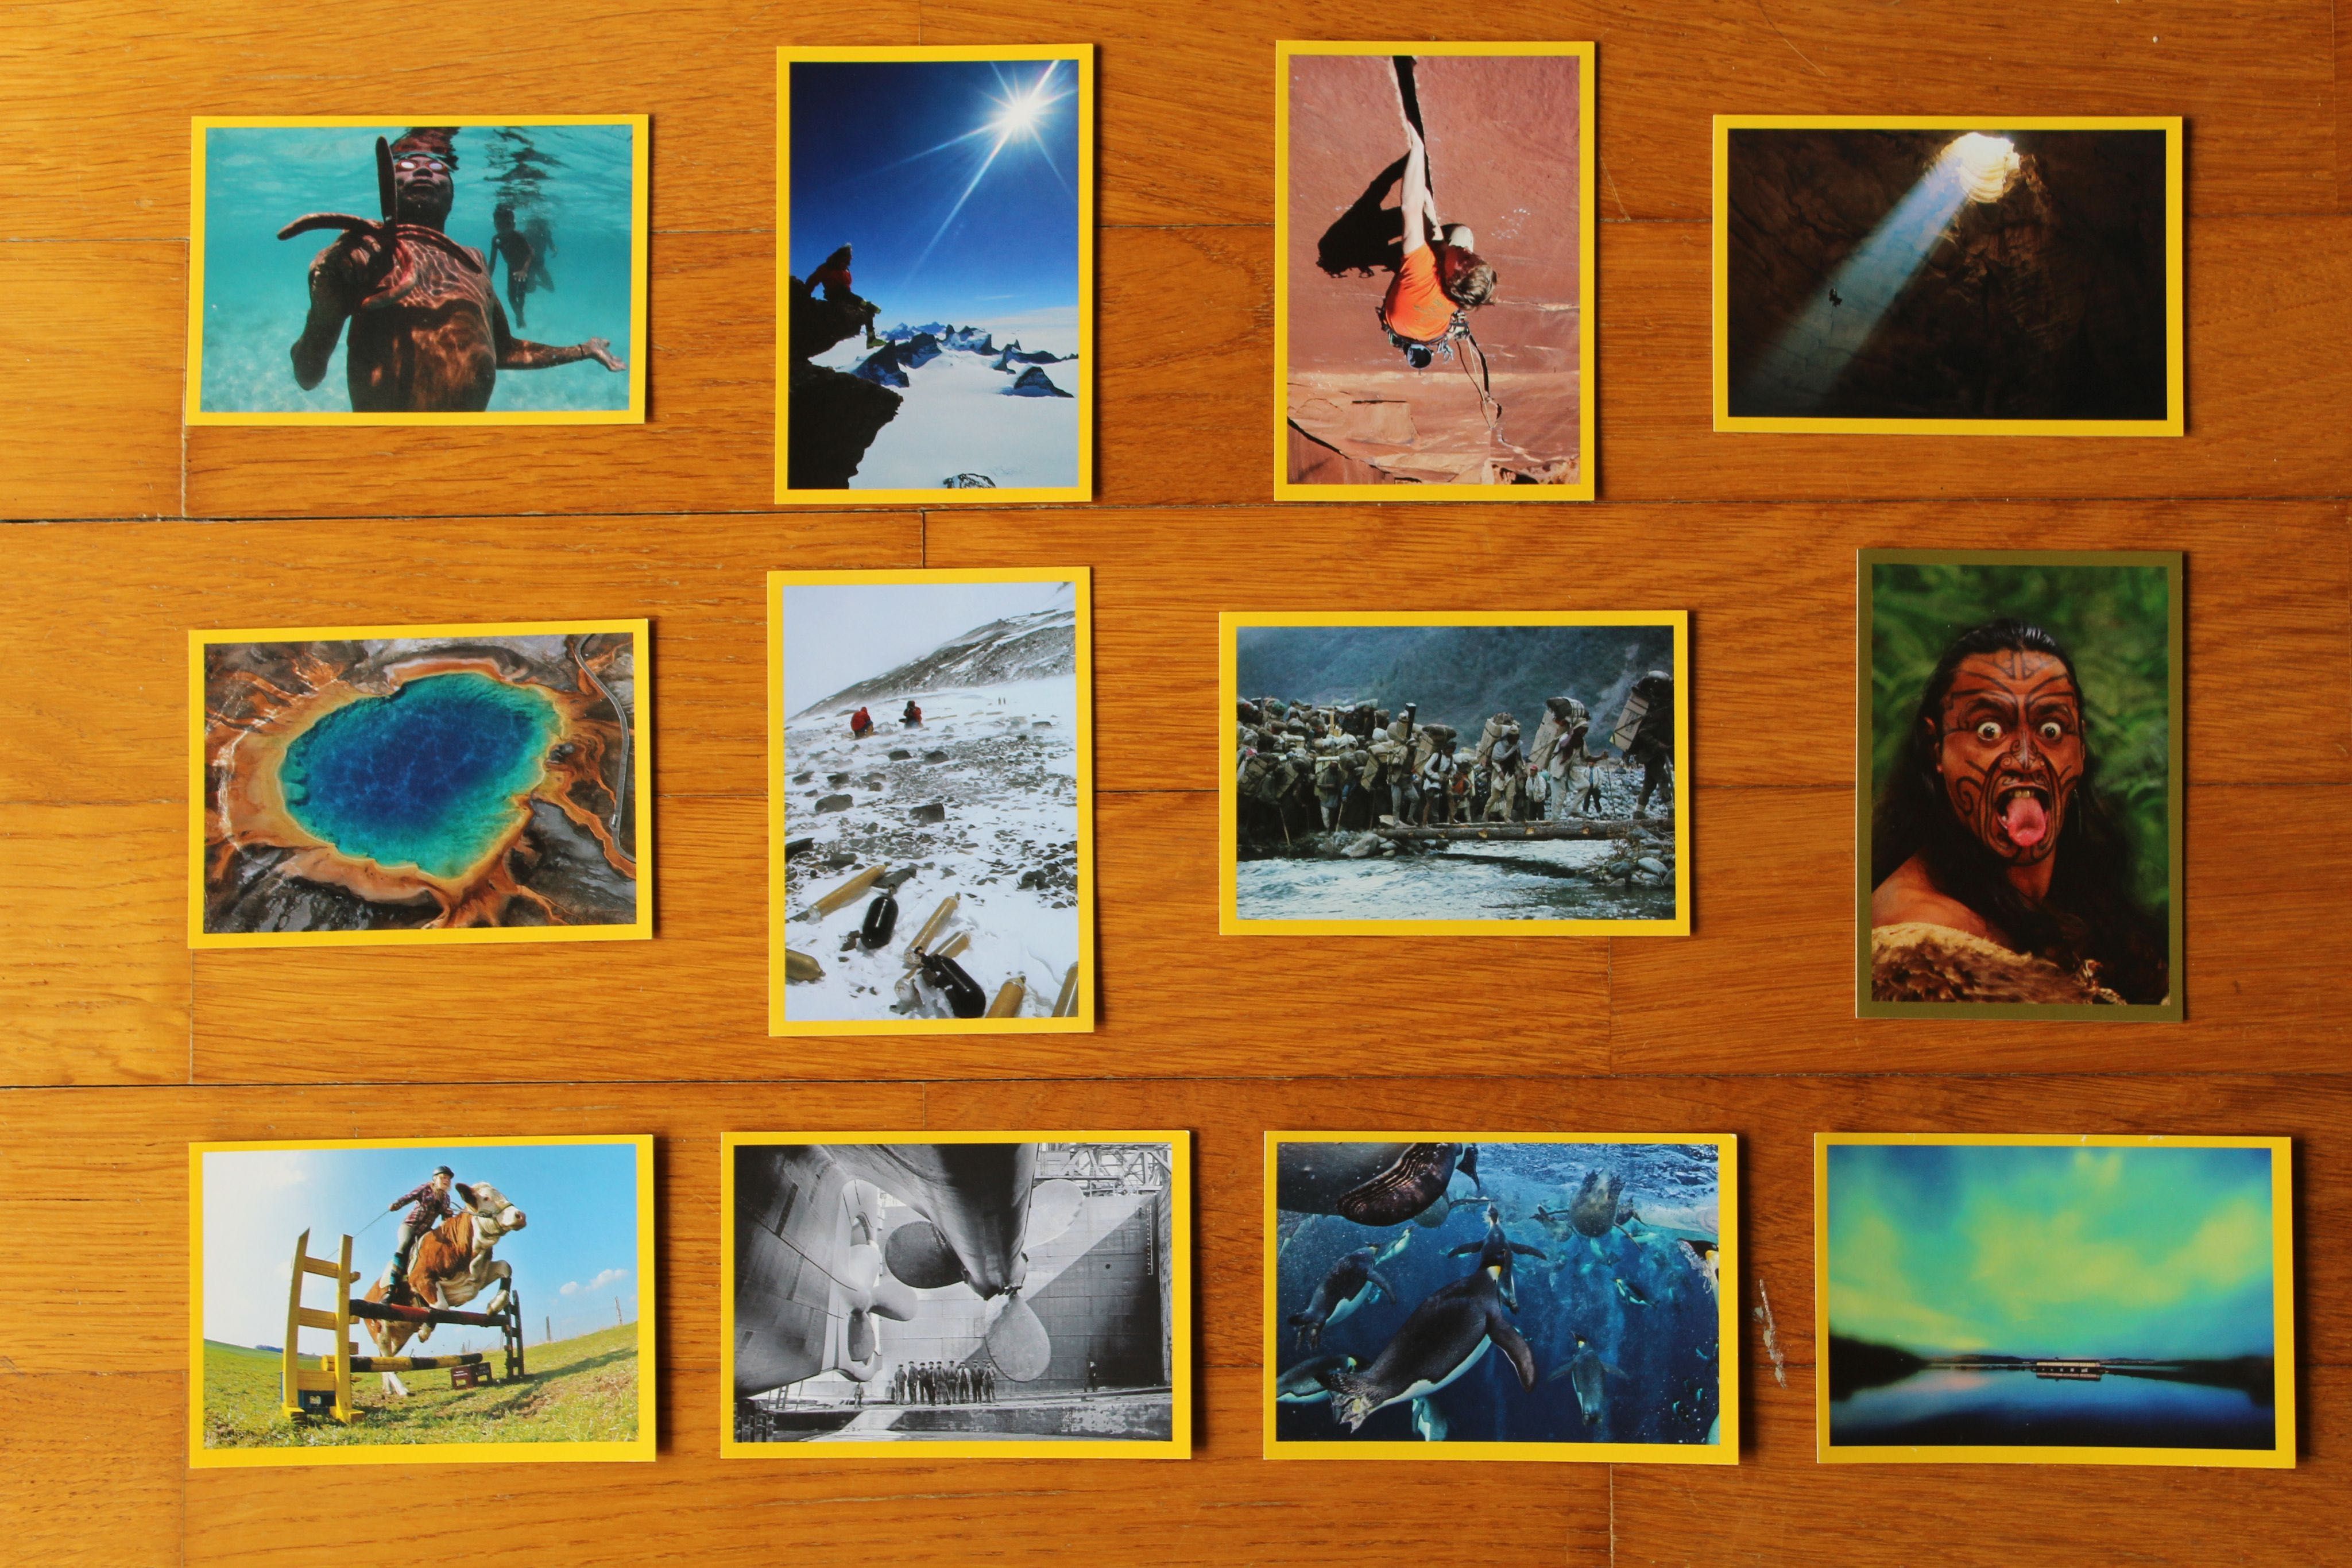 Cromos National Geographic Kids